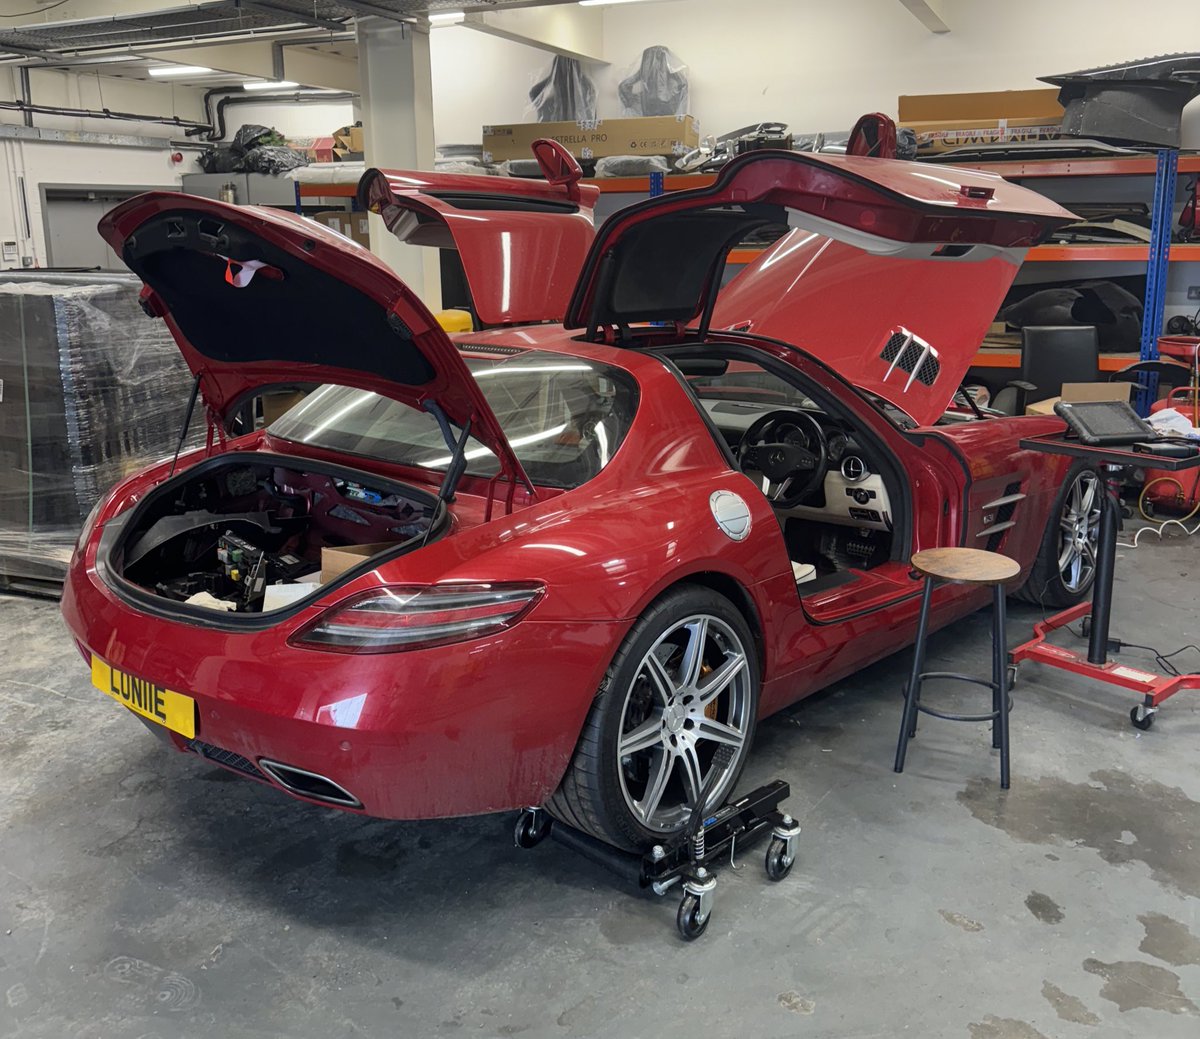 SLS update. We replaced all the control unit boxes for the electric seats, including a compete new fuse box, which was wet through. Whilst it started before, now it won’t start. We’ve ordered a new AMG gearbox drive control box which was also wet. Fingers crossed this sorts it 🤞